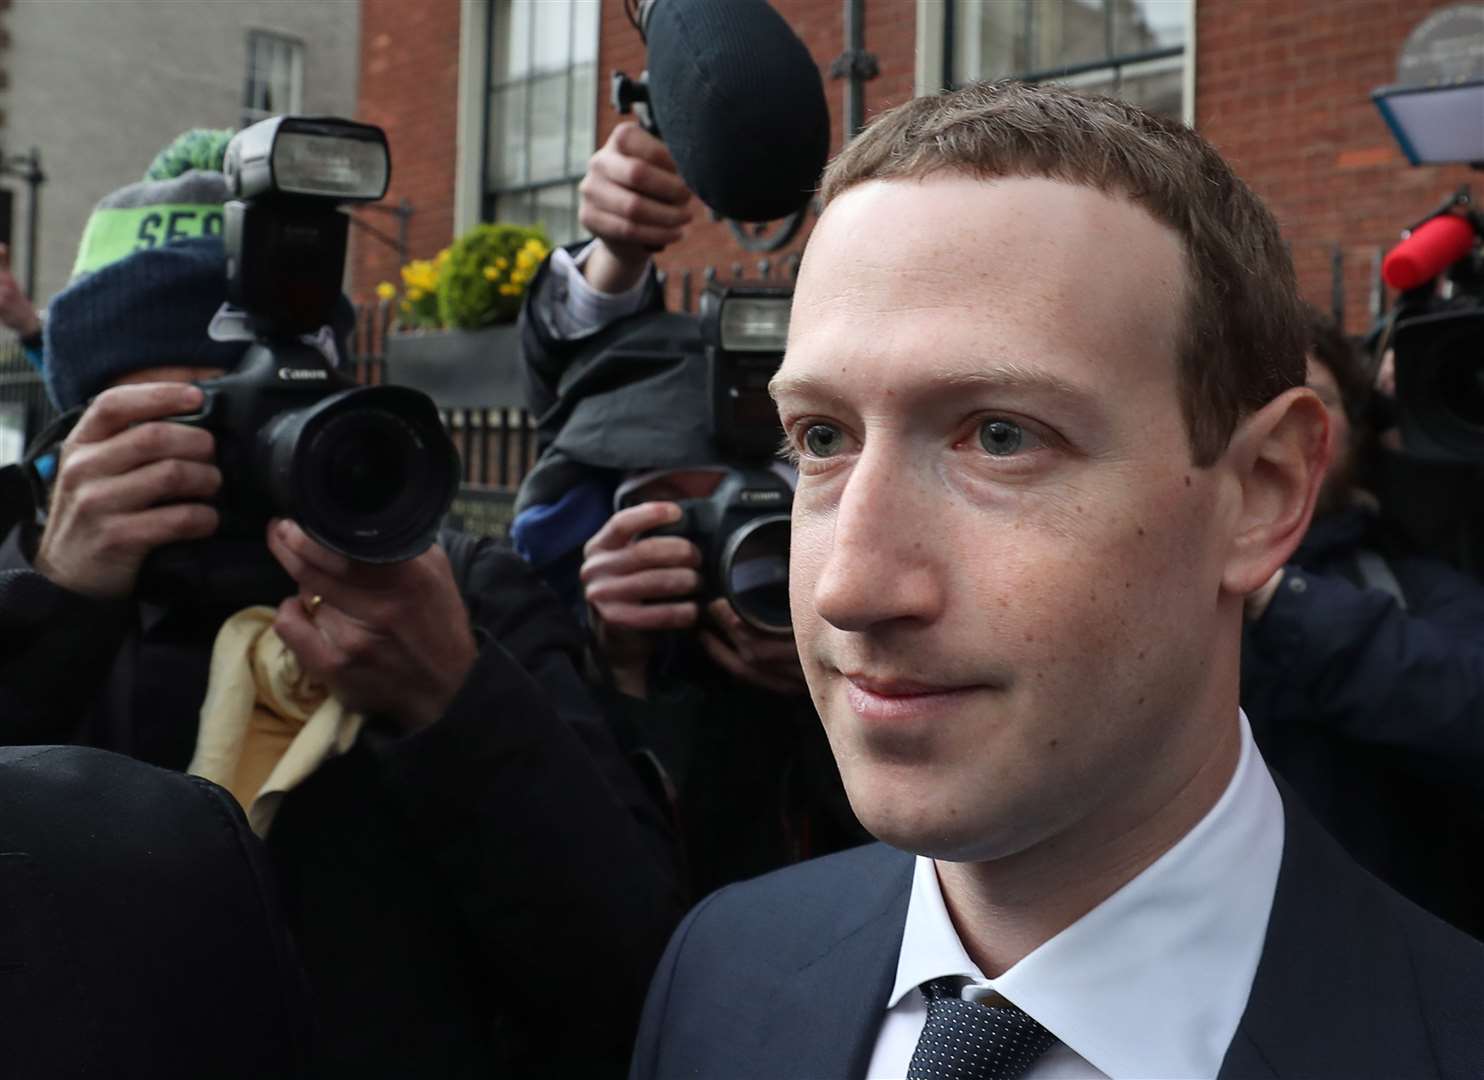 Facebook CEO Mark Zuckerberg leaving The Merrion Hotel in Dublin after a meeting with politicians to discuss regulation of social media and harmful content (Niall Carson/PA)